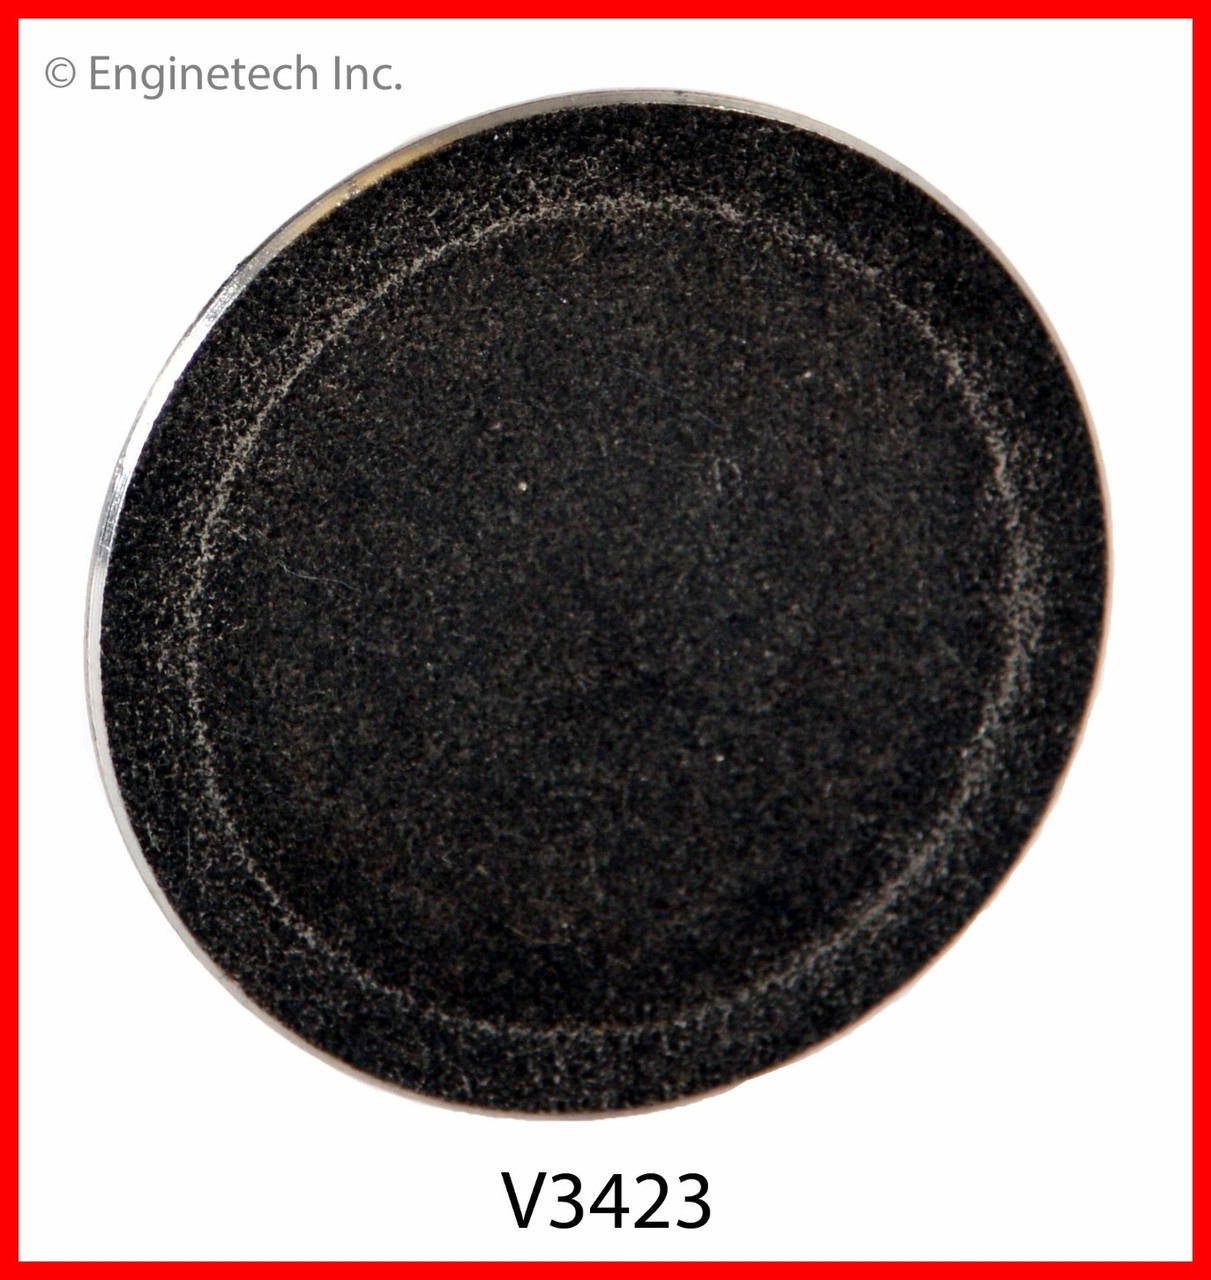 Exhaust Valve - 1997 Ford Taurus 3.0L (V3423.A3)